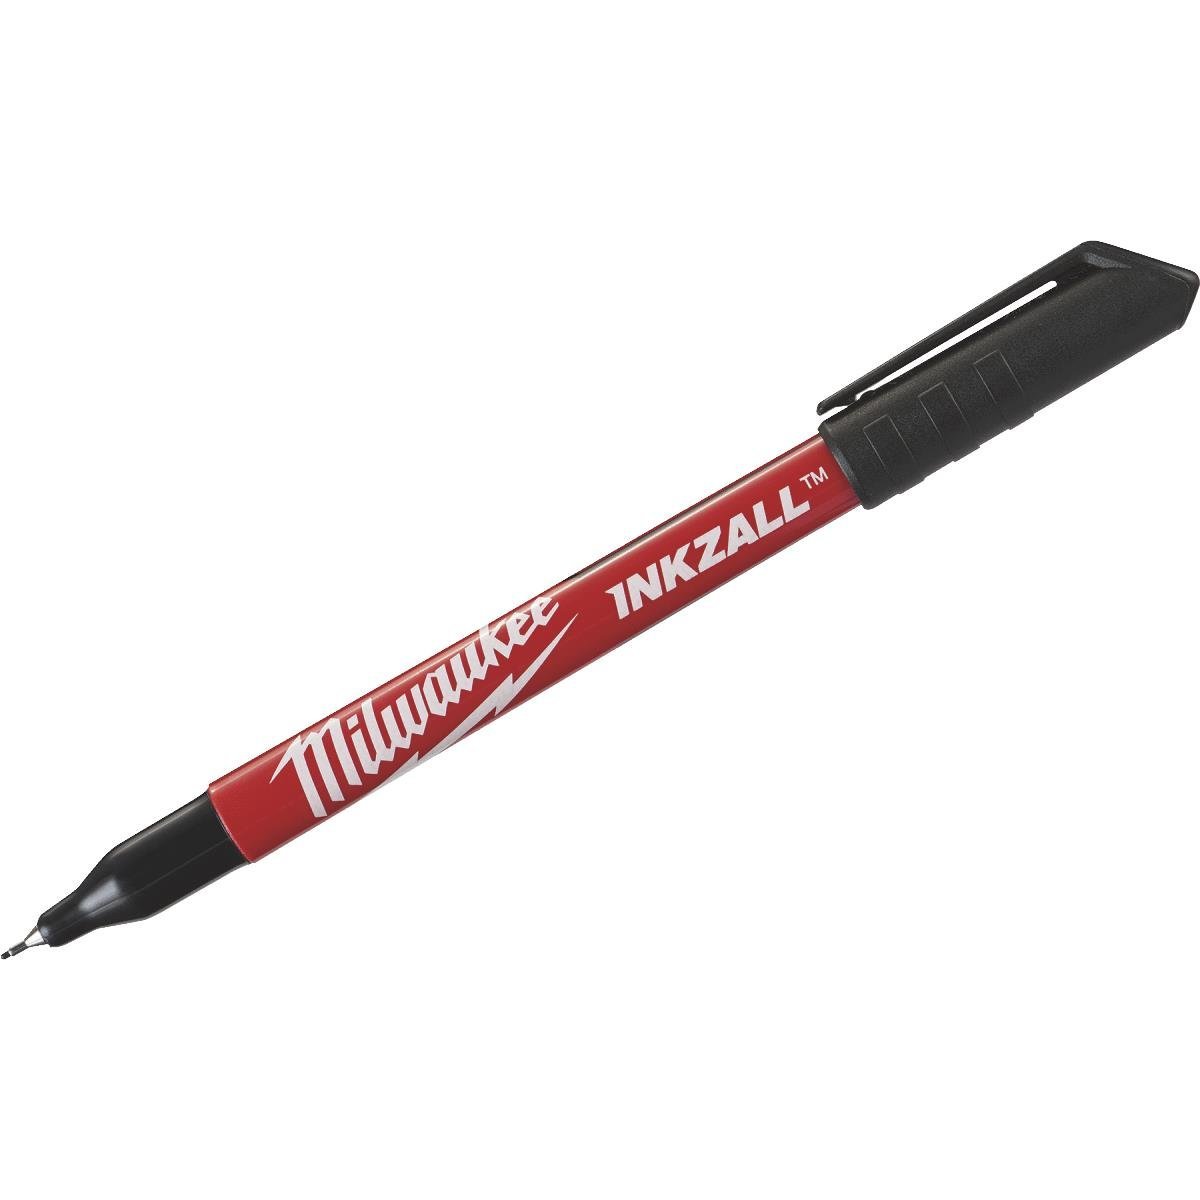 Milwaukee INKZALL™ ultra fine point pens are optimized for jobsite conditions and deliver sharp, precise lines. The durable ultra fine point tip delivers a 0.5 mm line for precise writing and labeling. Bleed resistant ink drys quickly and resists smears. 72 hour cap-off life delivers extended performance and use. An integrated pocket clip enables easy carry and storage.